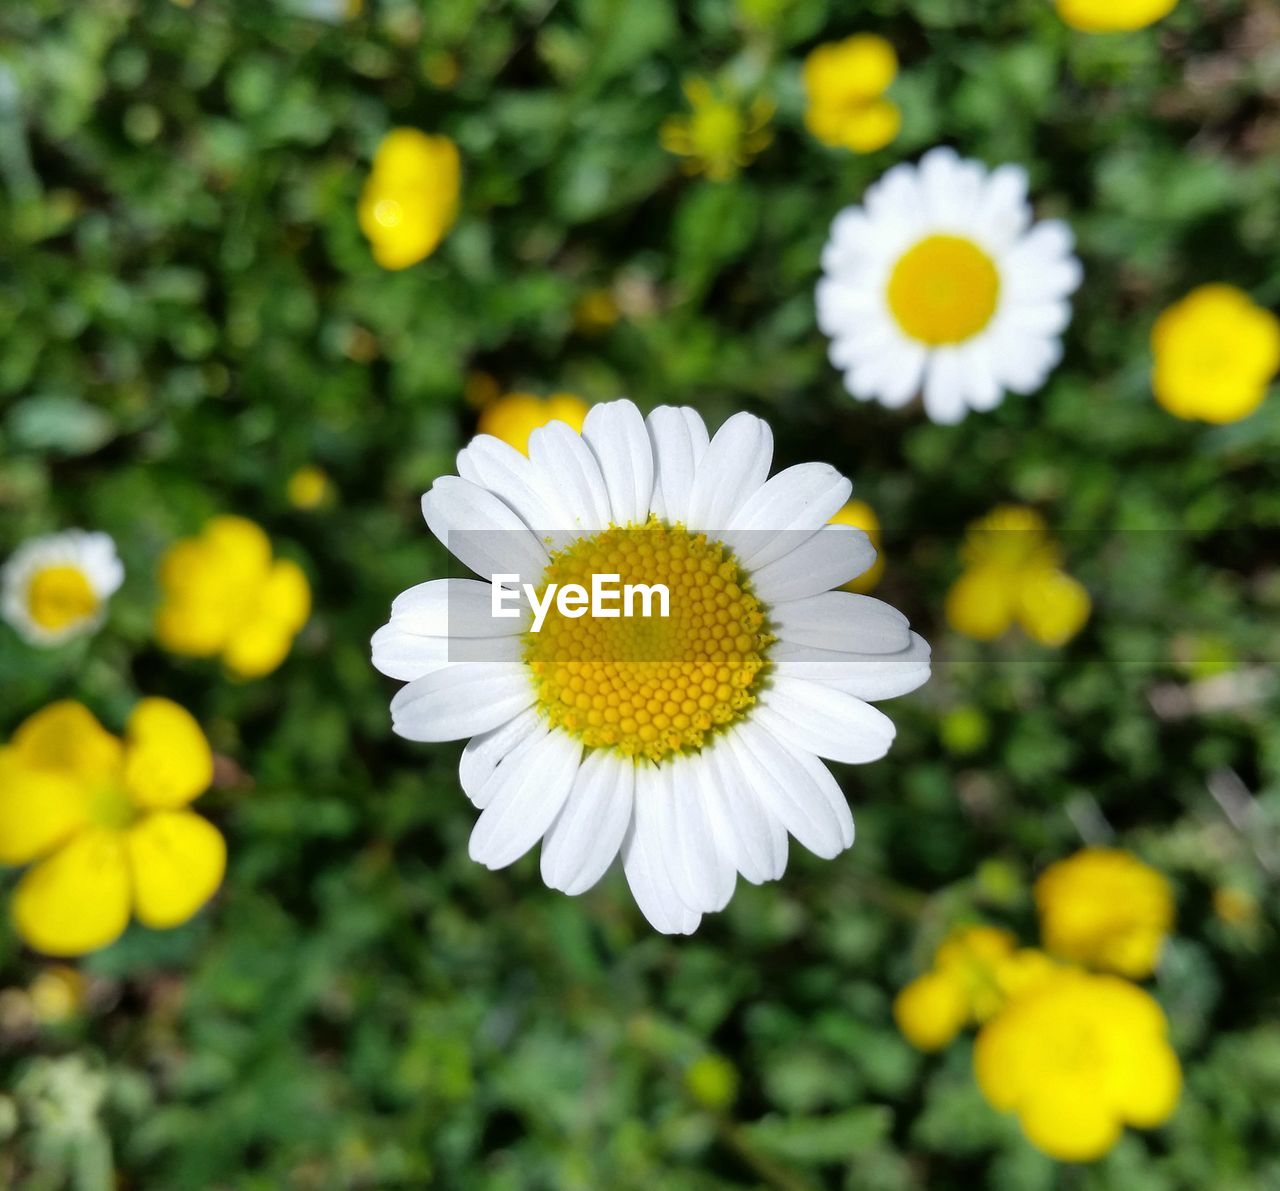 Daisy in a meadow of yellow flowers